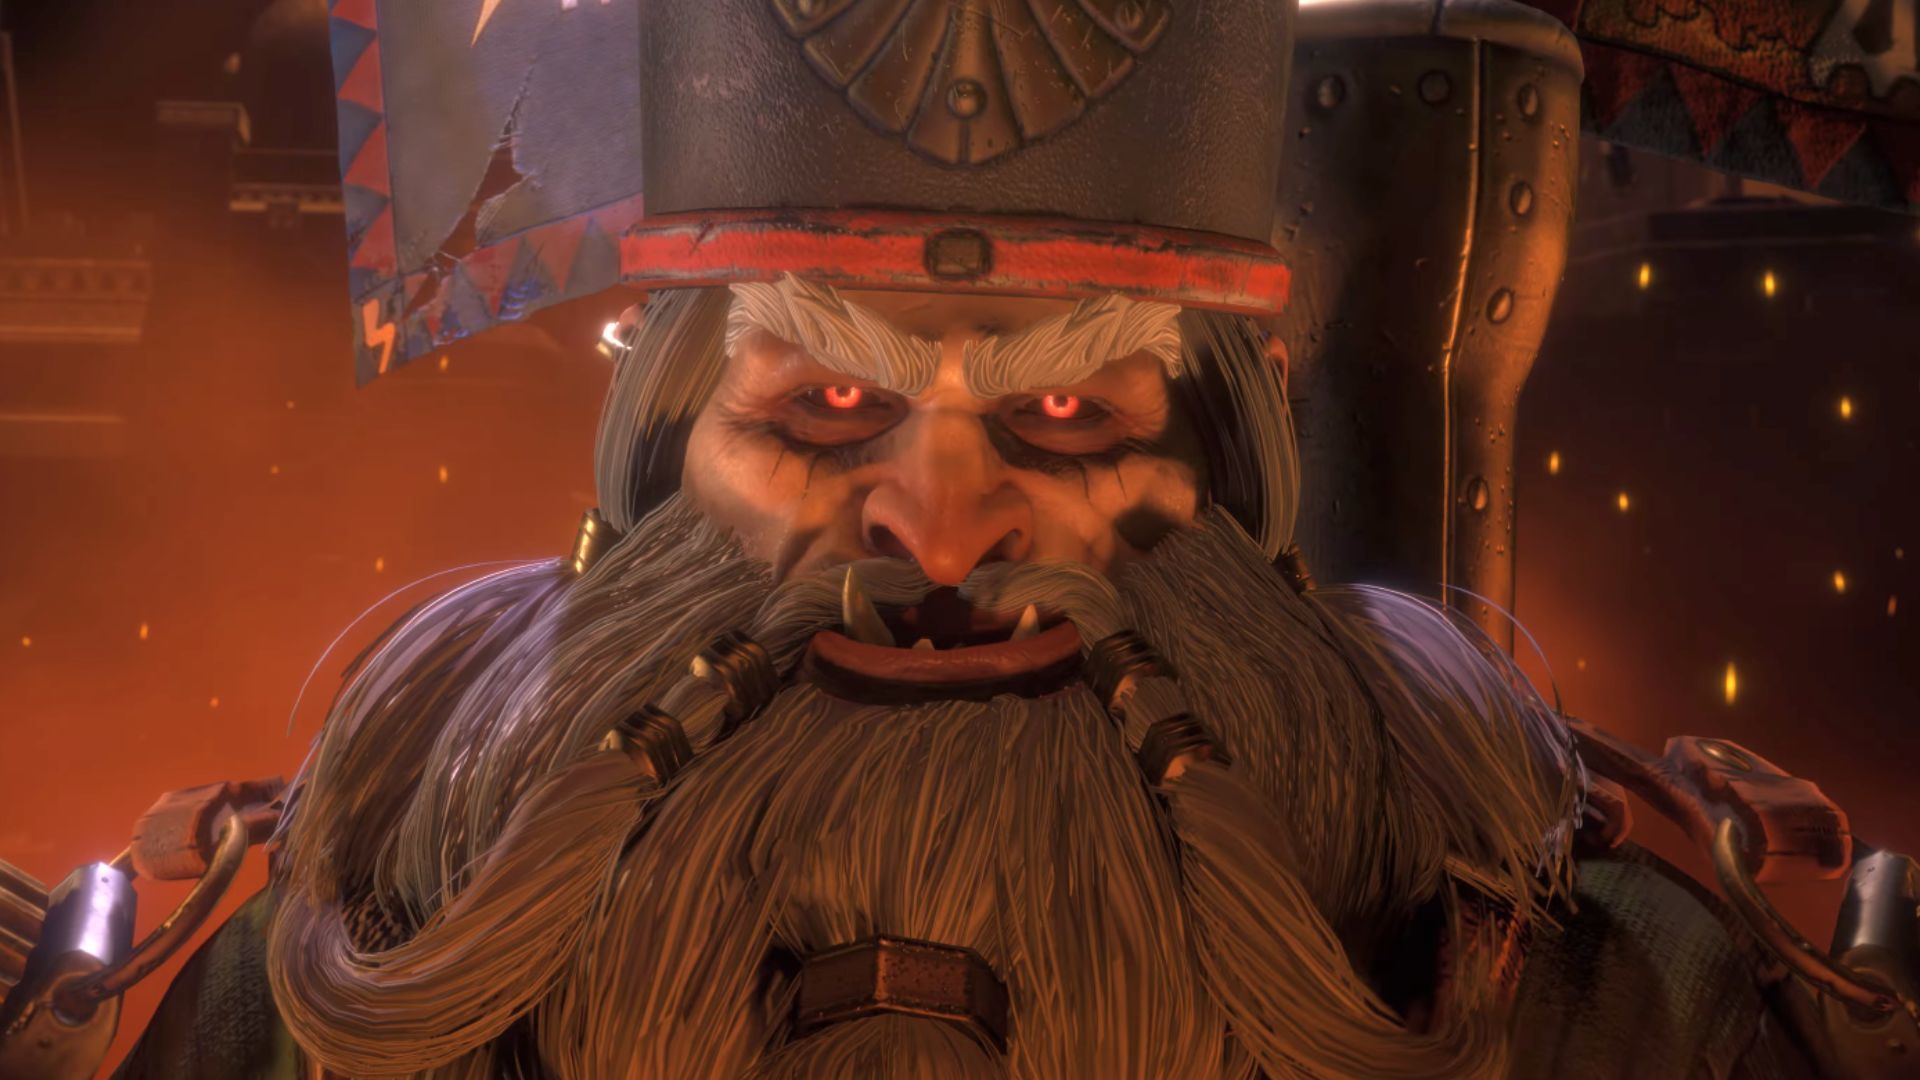 Total War: Warhammer III Introduces Forge of the Chaos Dwarfs DLC, Available April 13